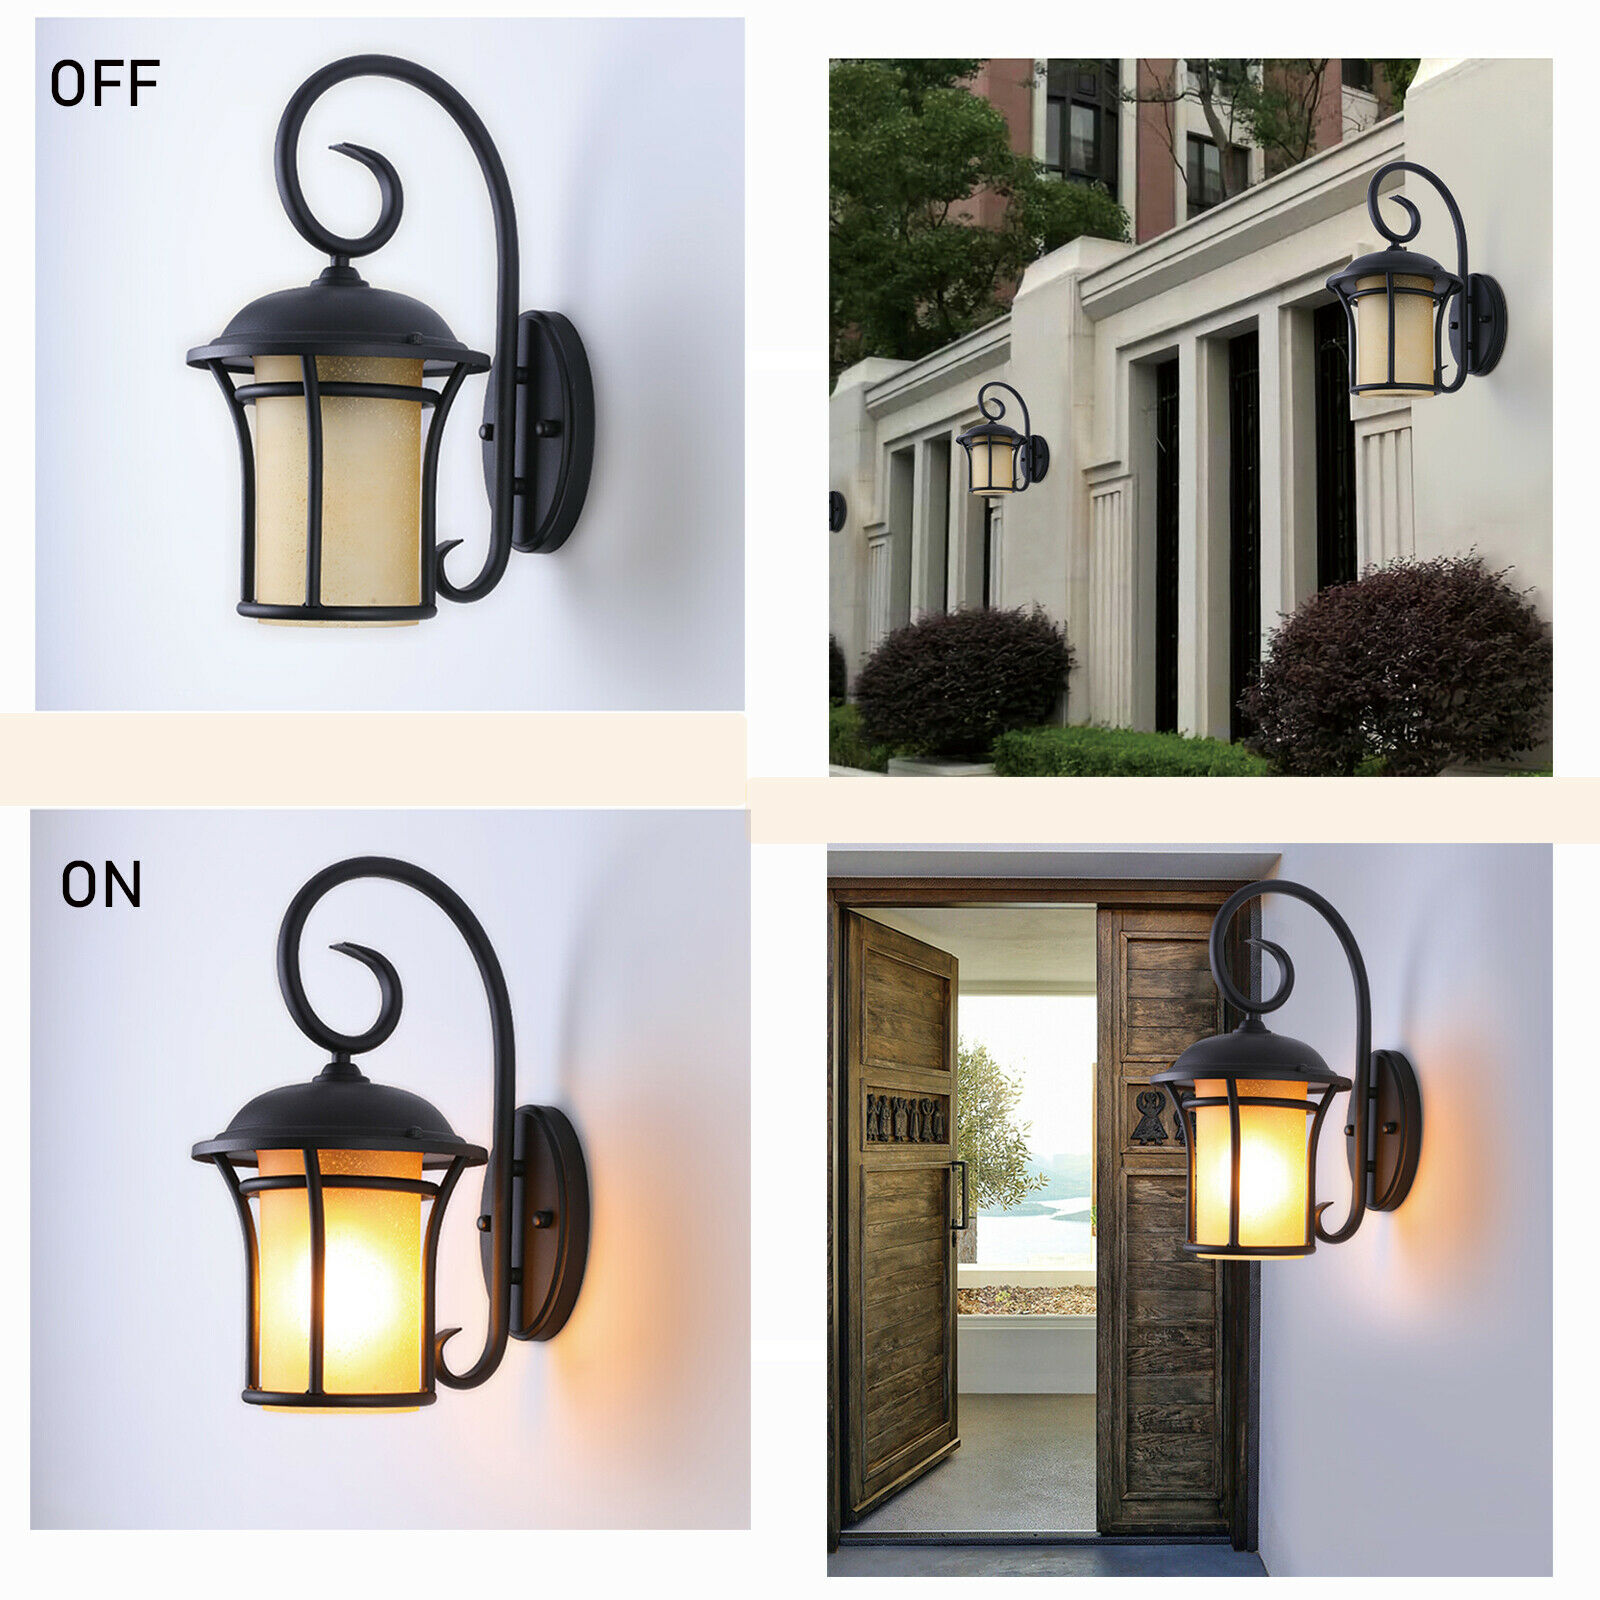 Exterior Wall Light Fixture Sconce Vintage Outdoor Retro Ground Glass Porch Lamp Outdoor Wall Light Exterior Wall Lantern Waterproof Sconce Porch Black Finshing Entryways Lighting Wall Mounted Lamp - image 2 of 10